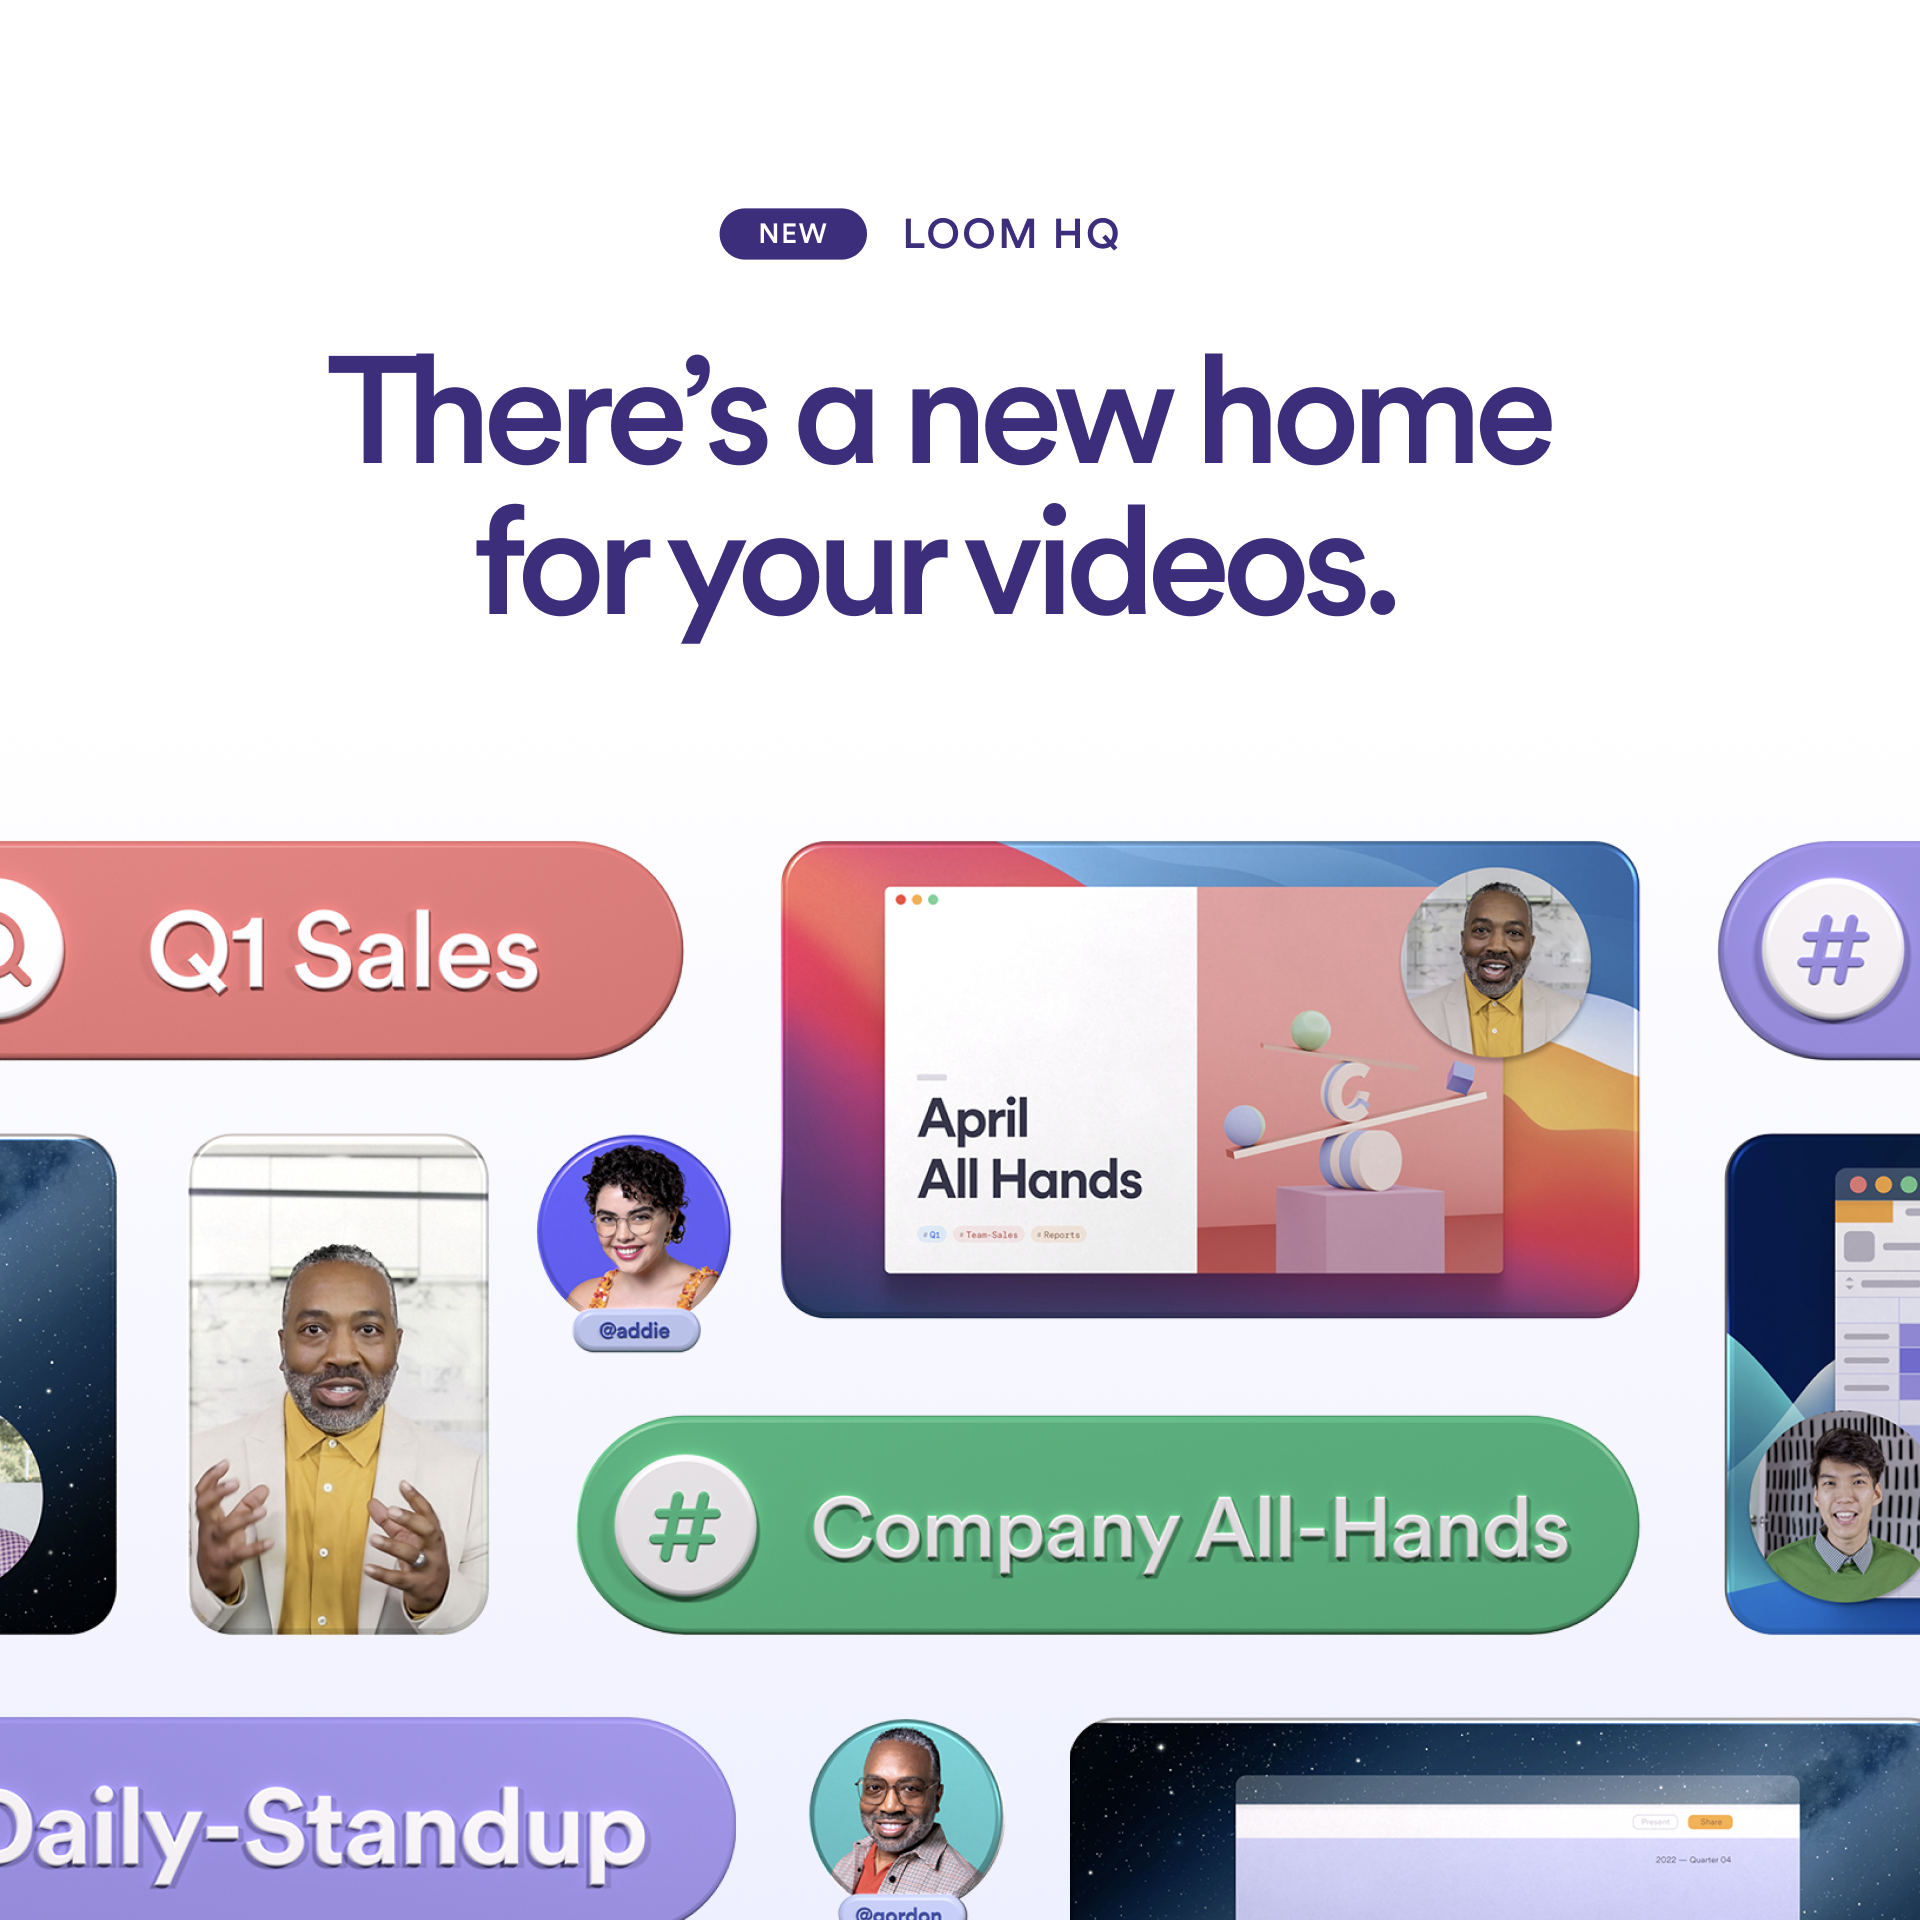 Welcome to Loom HQ – a home for your videos.